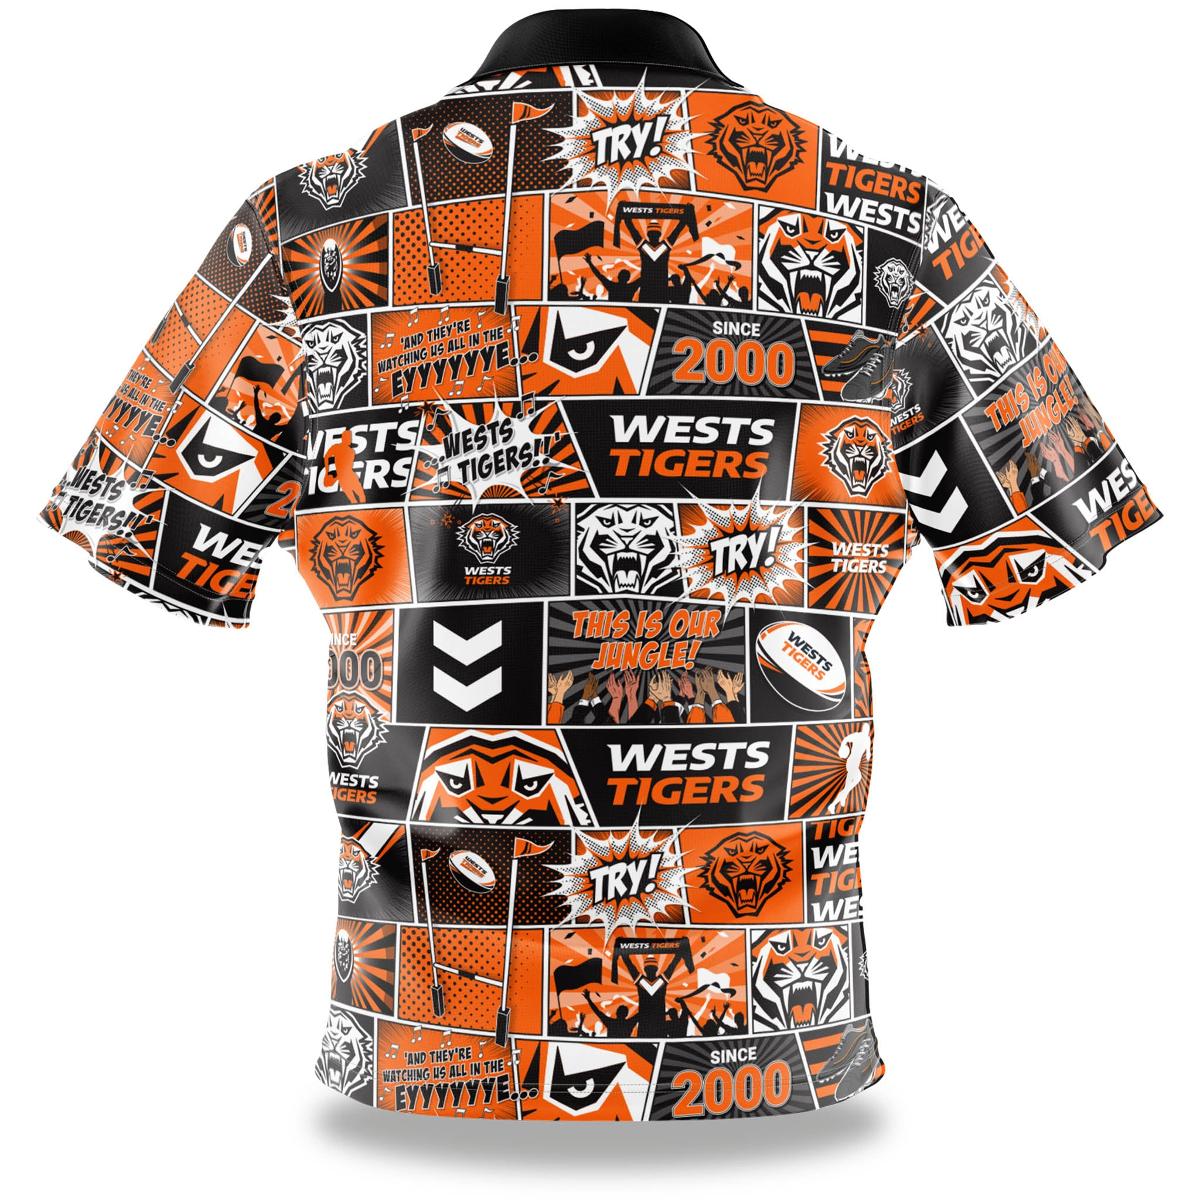 Wests Tigers Vintage Football Team Since 2000 Vintage Hawaiian Shirt For Nrl Fans